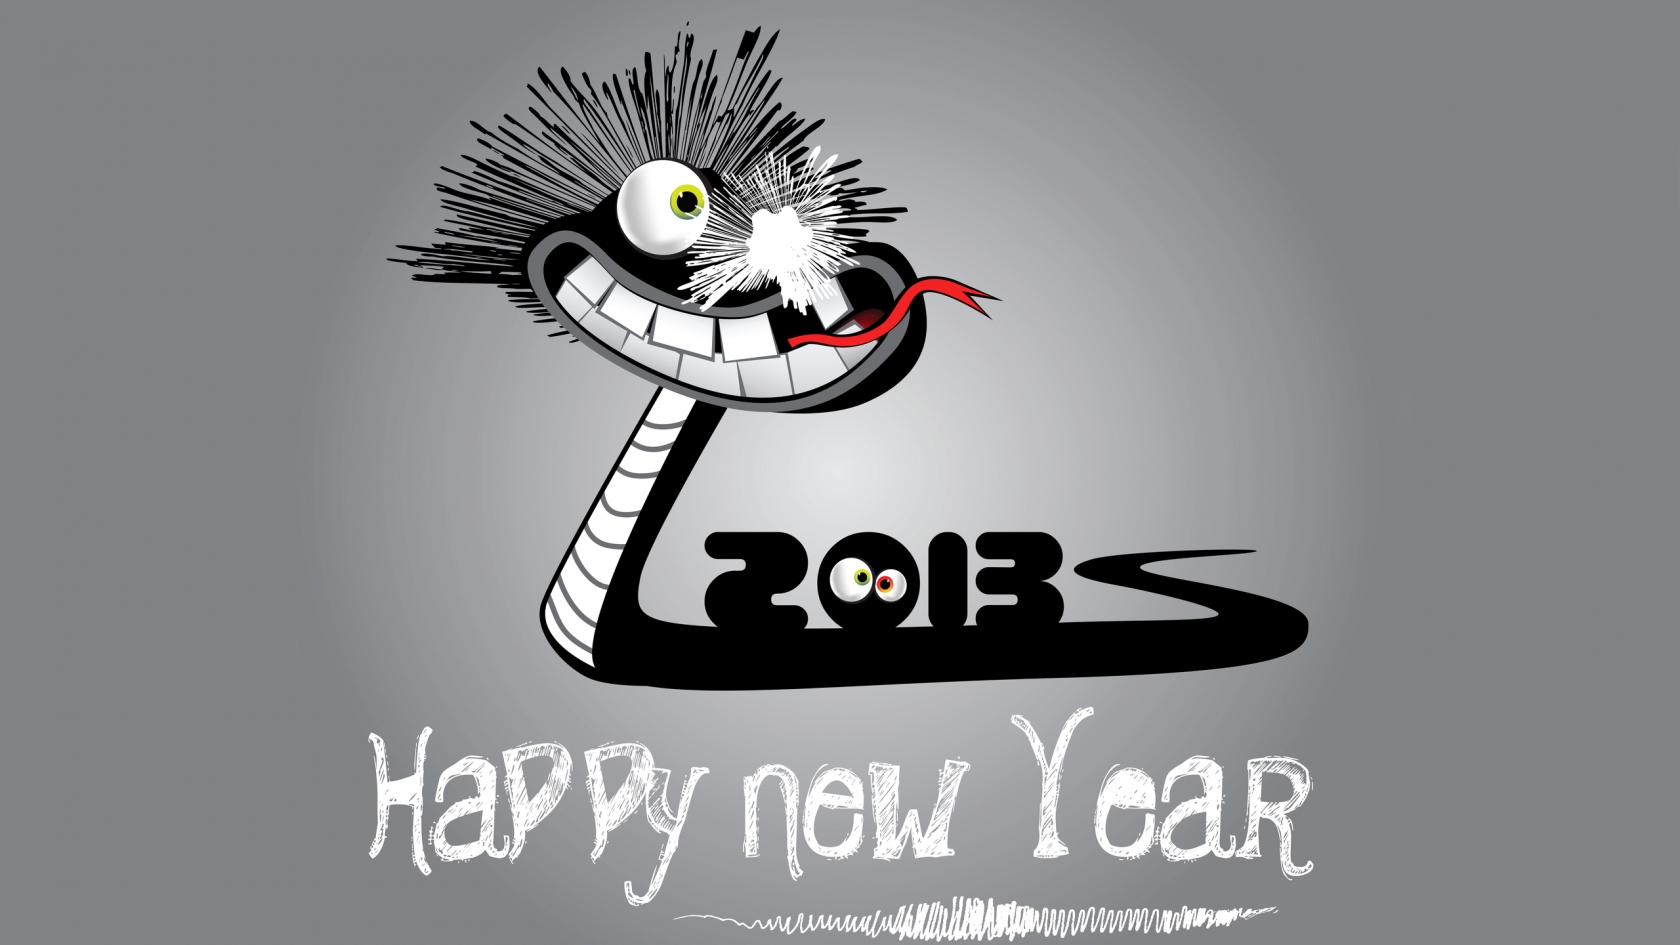 2013 Happy New Year for 1680 x 945 HDTV resolution